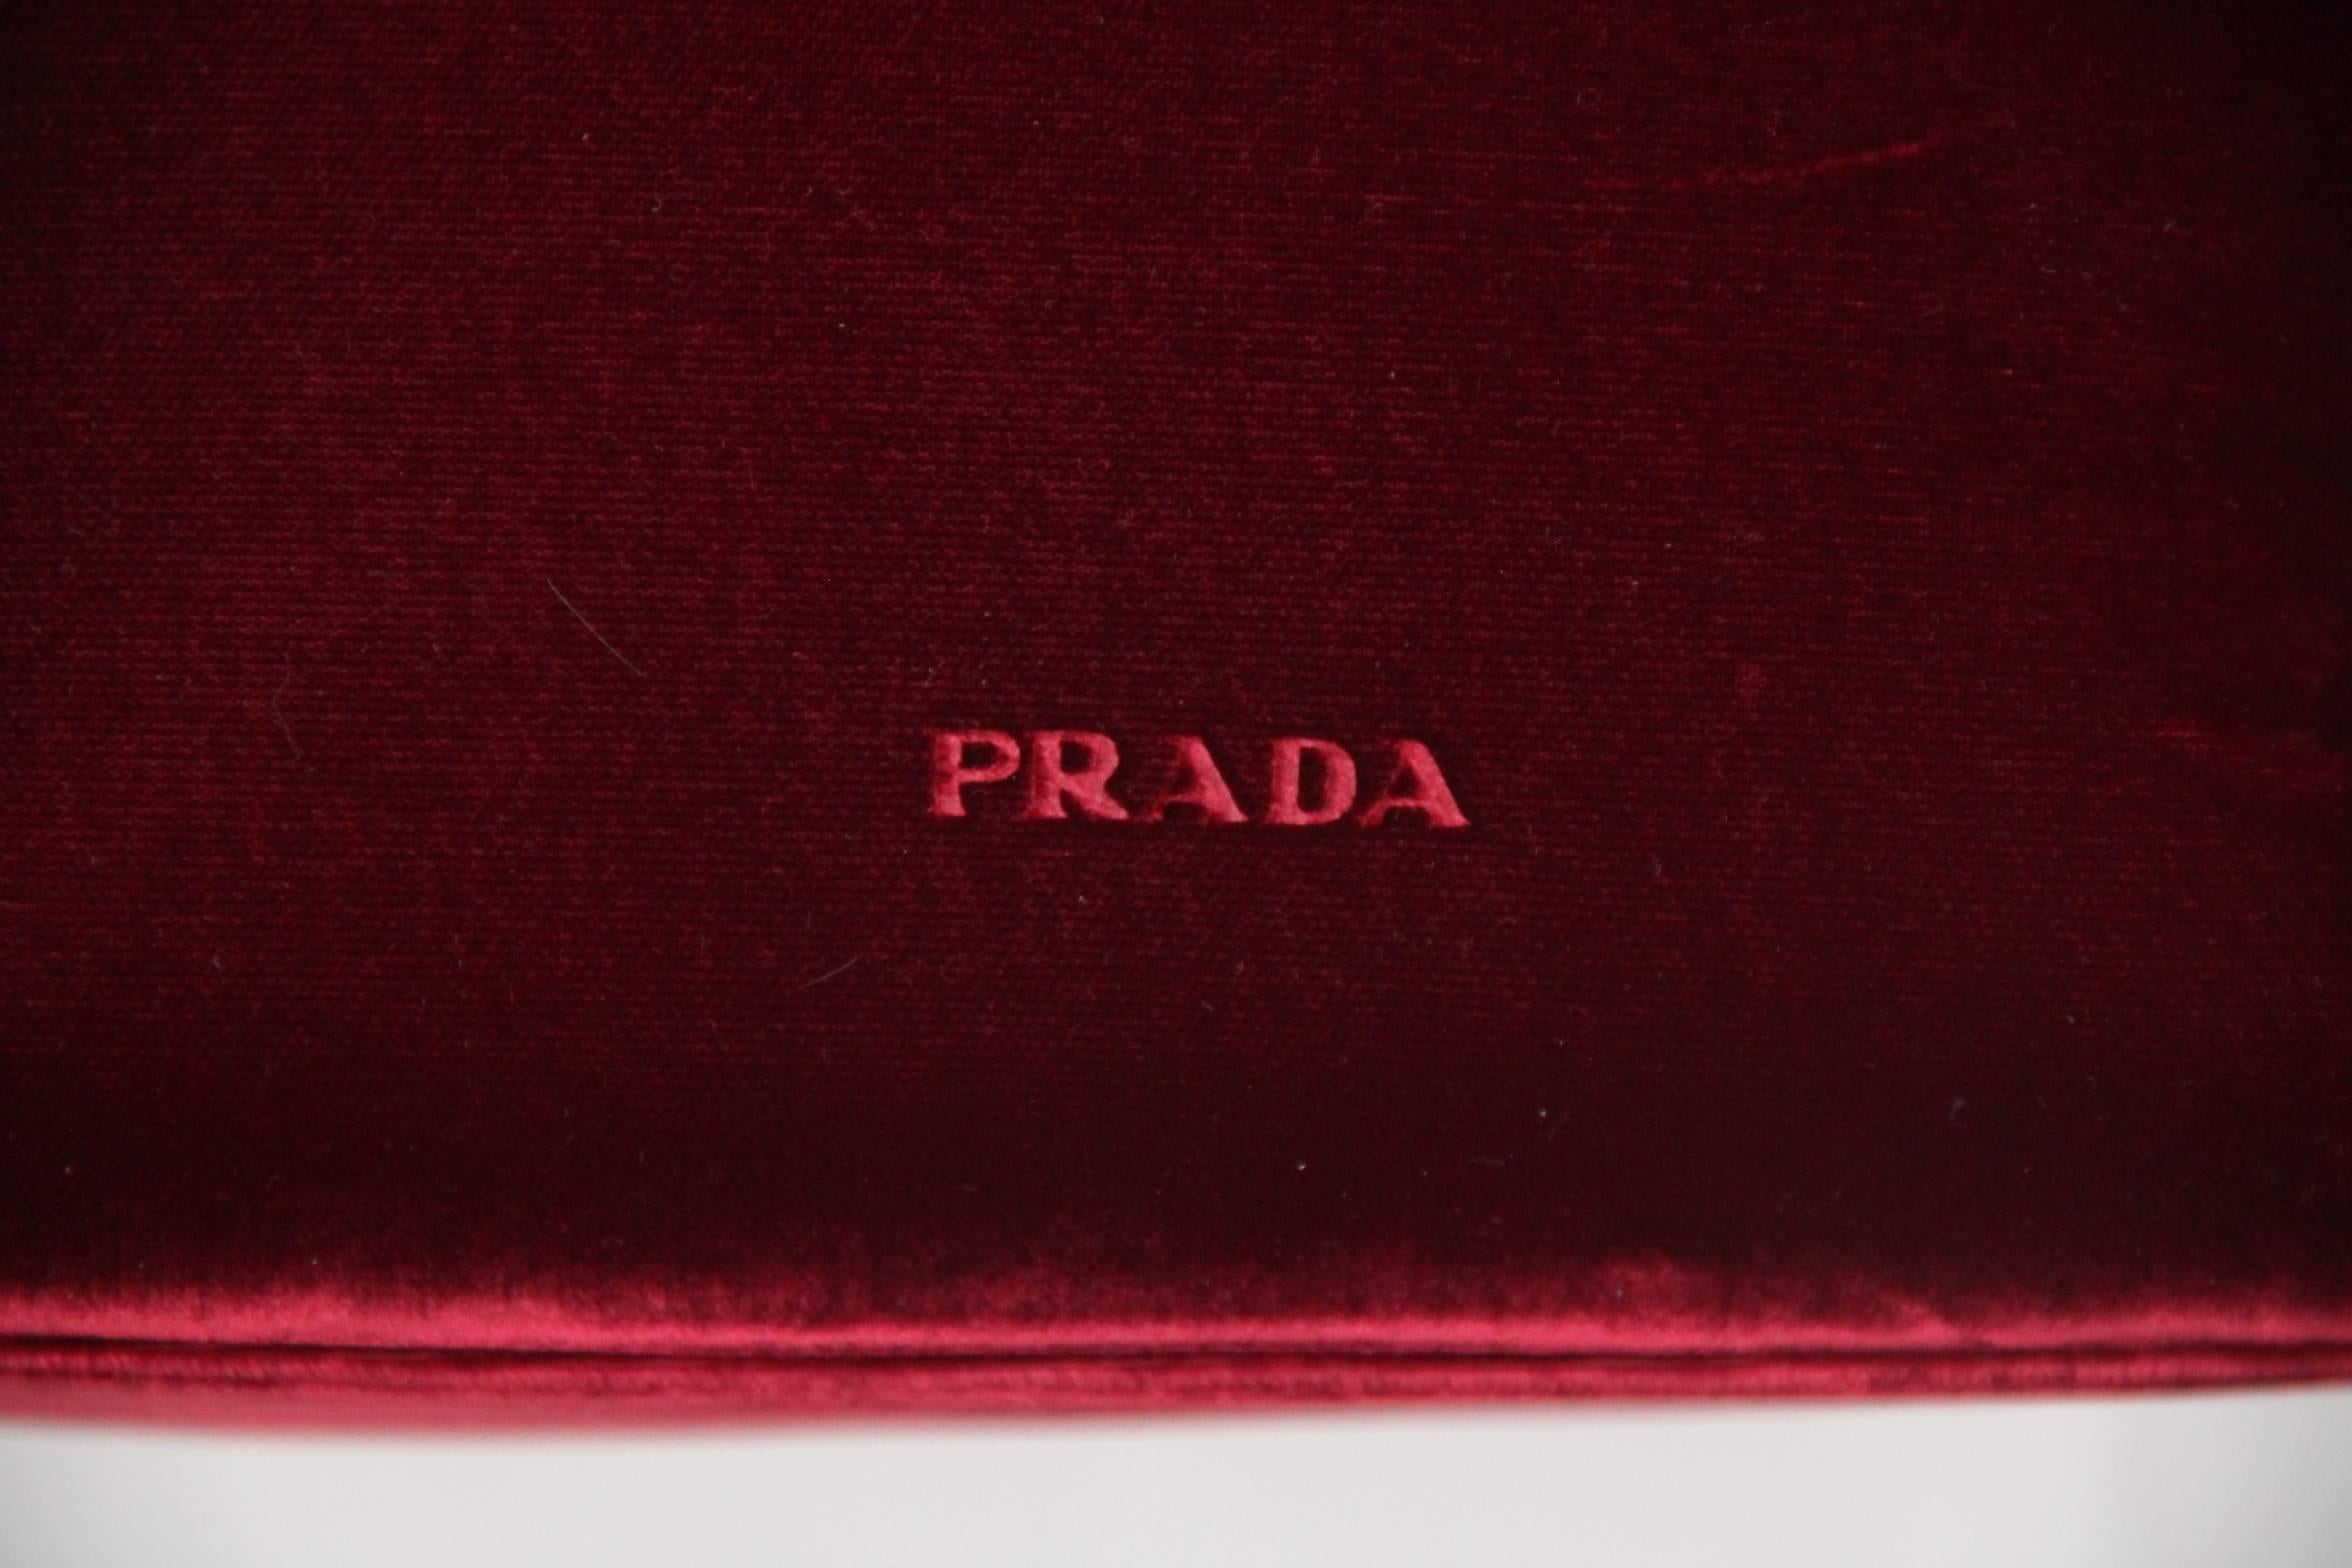 - Red velvet frame handle bag by PRADA
- PRADA signature engraved on the front
- Upper clasp closure
- Black fabric lining with PRADA signatures
- 1 side zip pocket inside 
- Measurements of the purse: 7 x 10  x 4 inches - 17,7 x 25,4 x 10,2